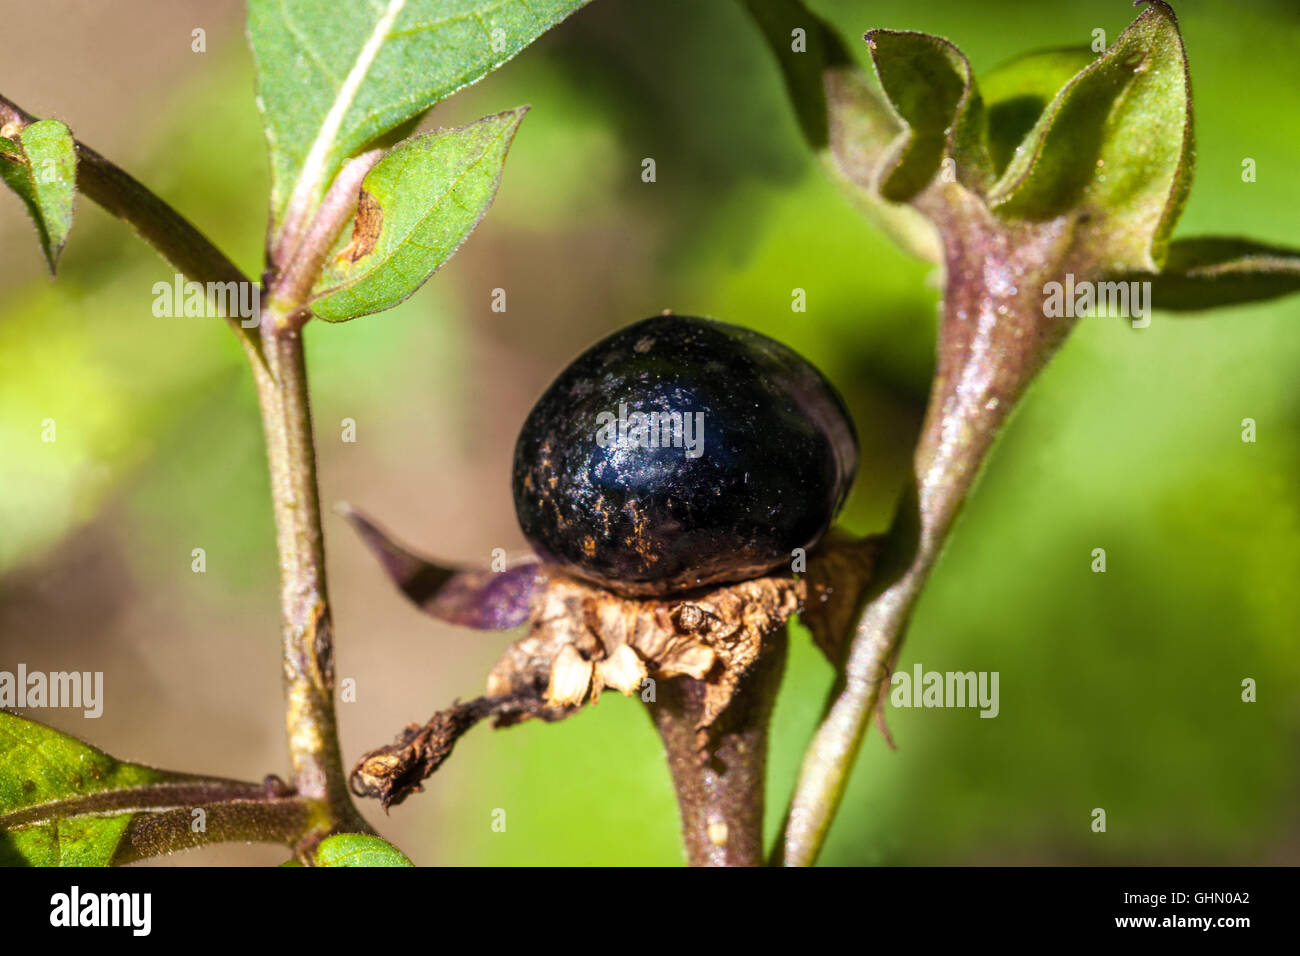 Deadly nightshade, Atropa belladonna poisonous and dangerous plant Stock Photo